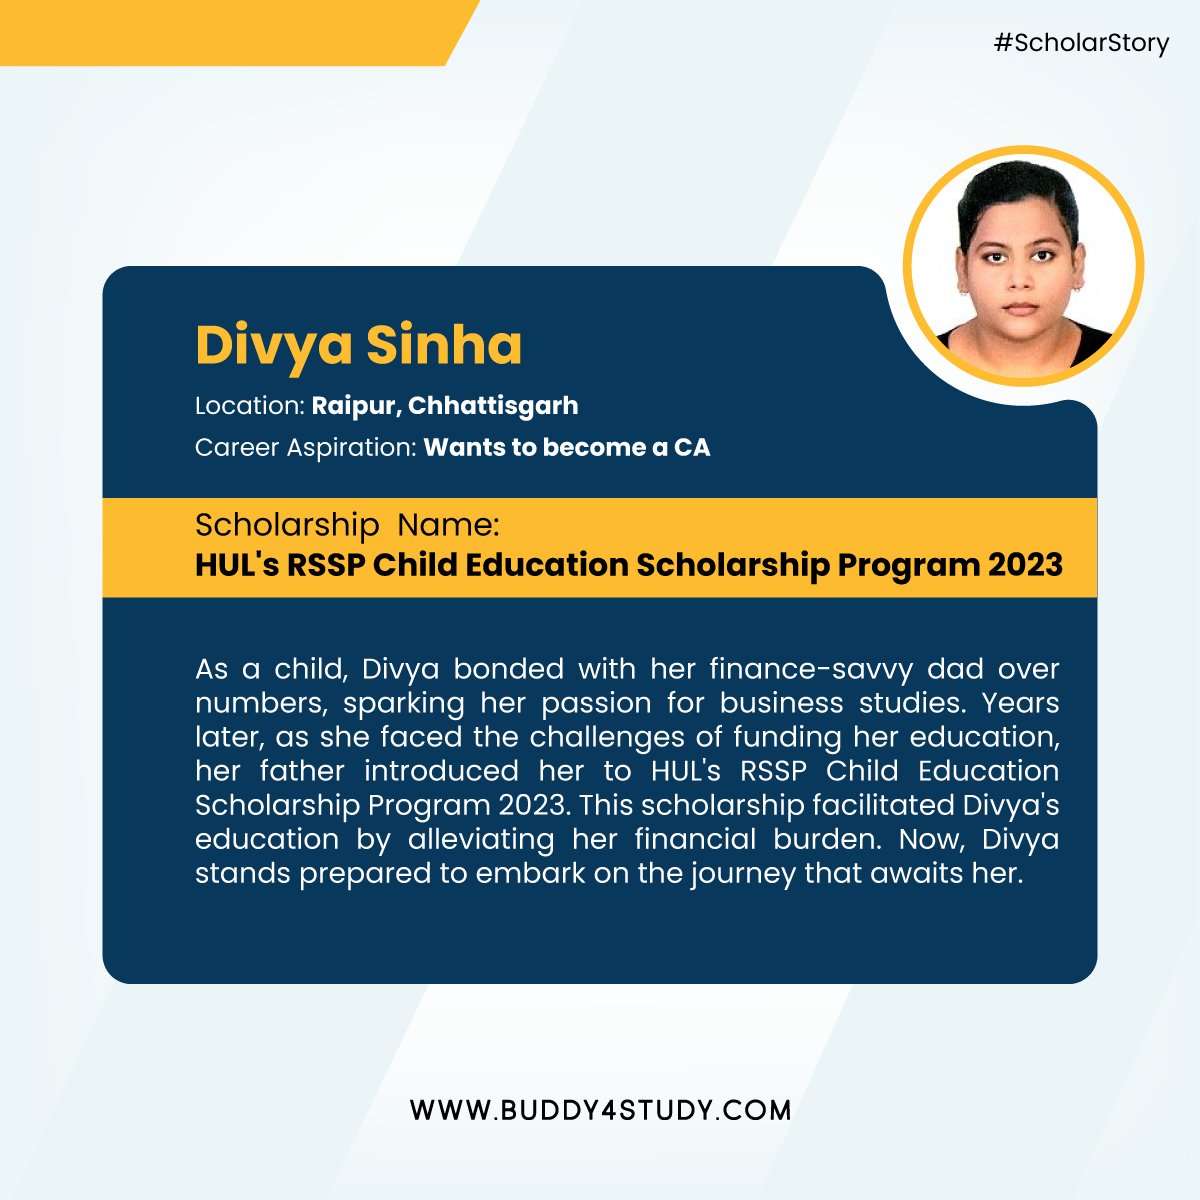 Parents, ignite the flame in your child. Nurture curiosity and dialogue. Meet Divya, a testament to nurturing, supported by #HUL's RSSP Scholarship 2023. Empower your child's dreams. #Buddy4Study #Scholarstory #Ambition #CA #Business #Commerce